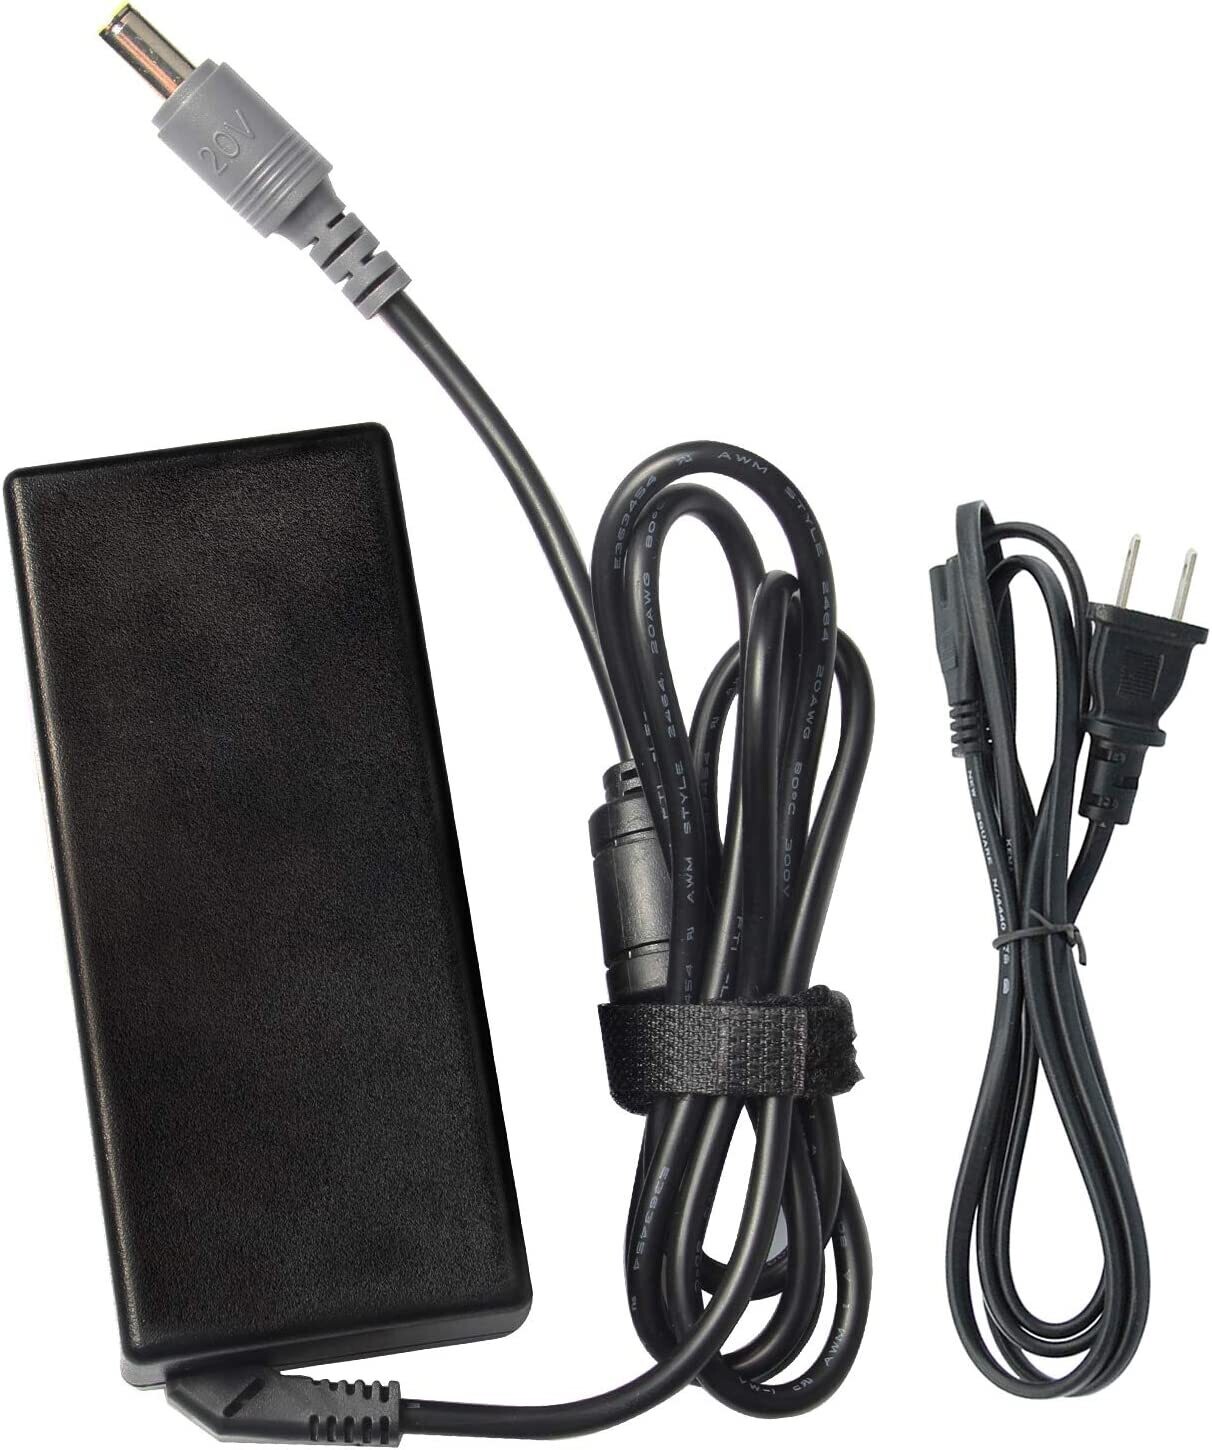 20V 3.25A 65W Laptop AC Power Supply Cable Charger Adapter for IBM Lenovo 92P1105 92P1106 92P1109 92P1110 92P1113 7.9x5.5mm